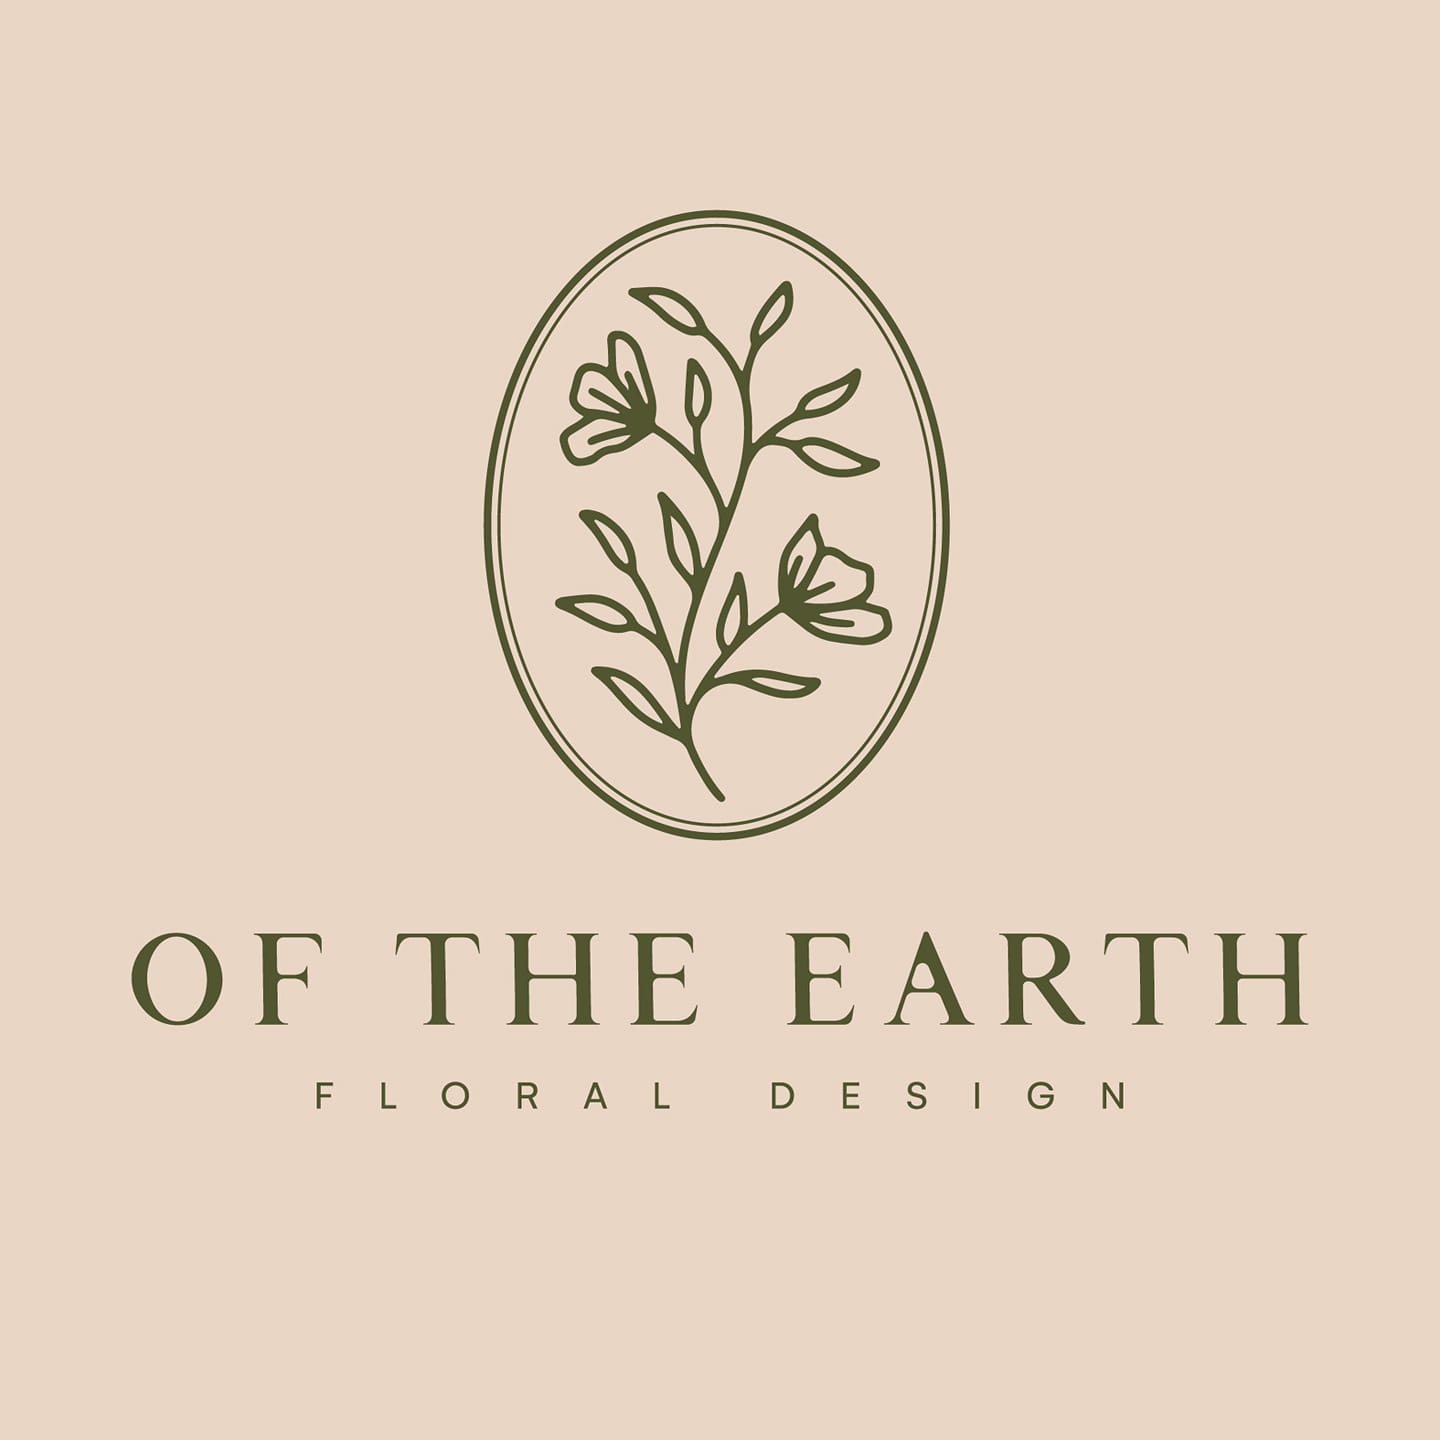 Of the Earth logo.